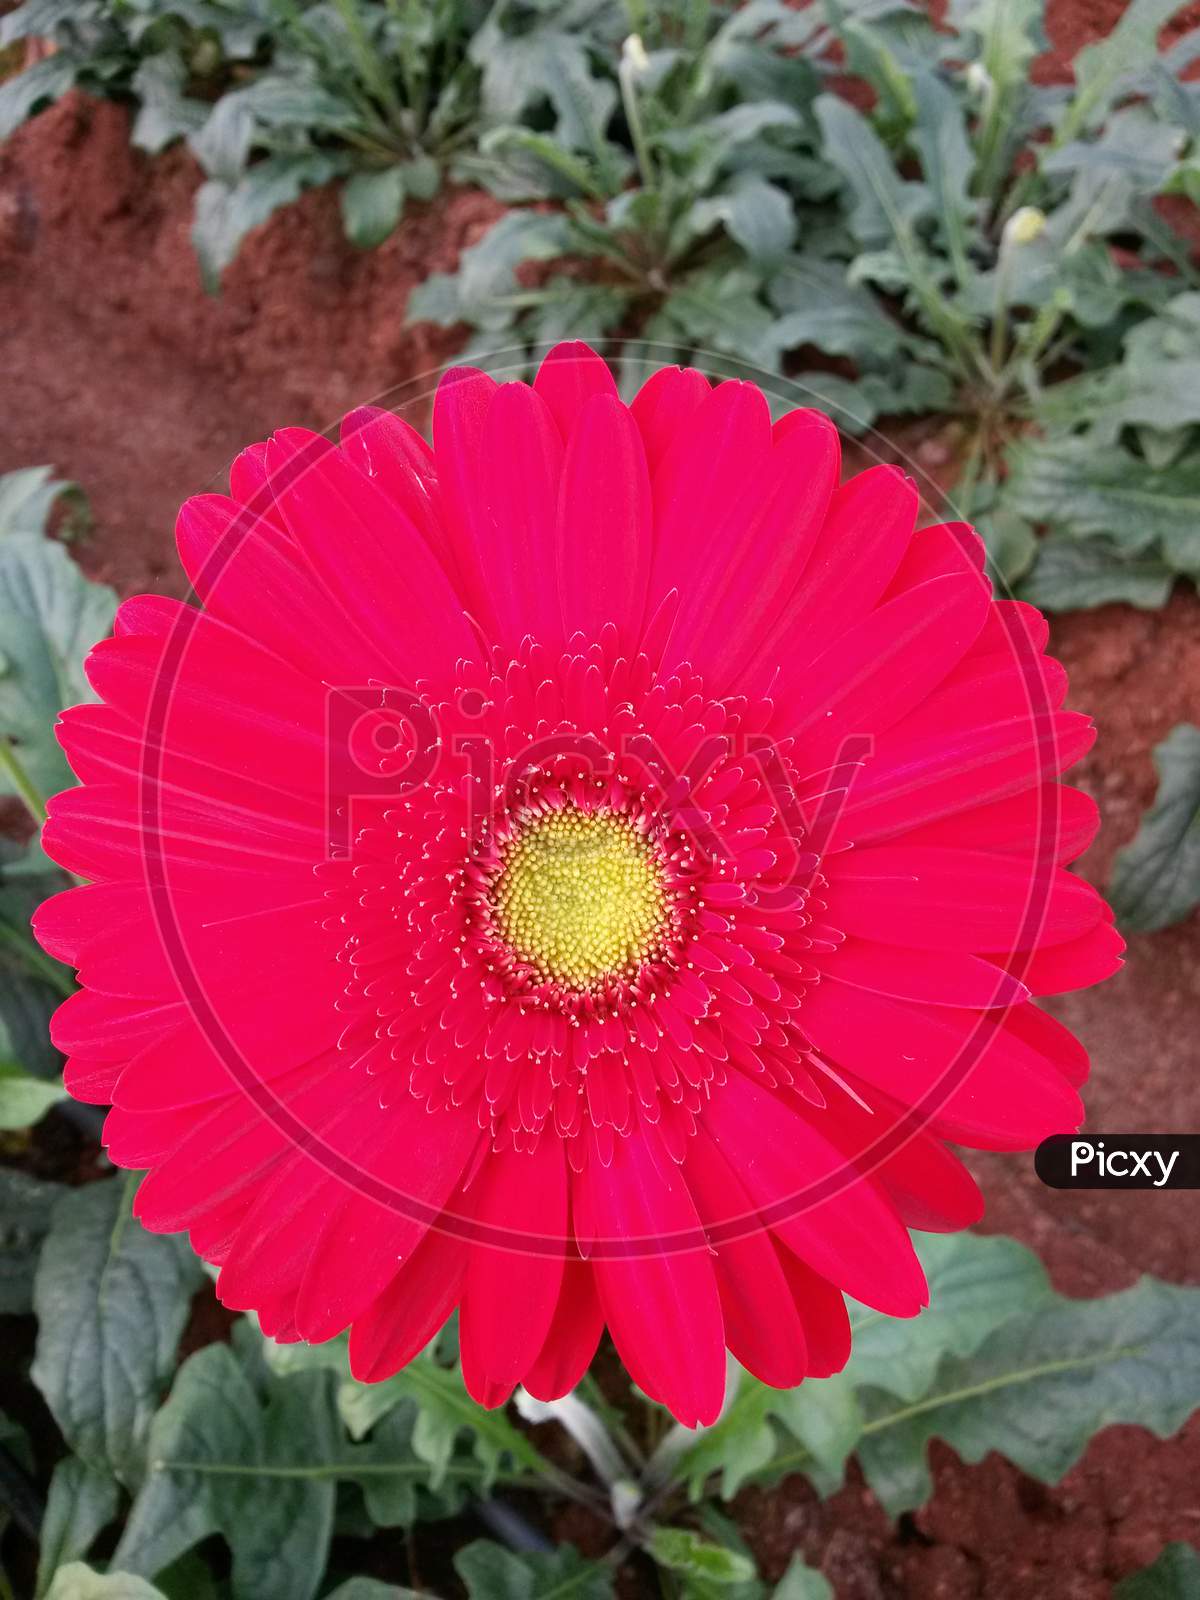 Red Gerbera Flower With Yellow Center Core